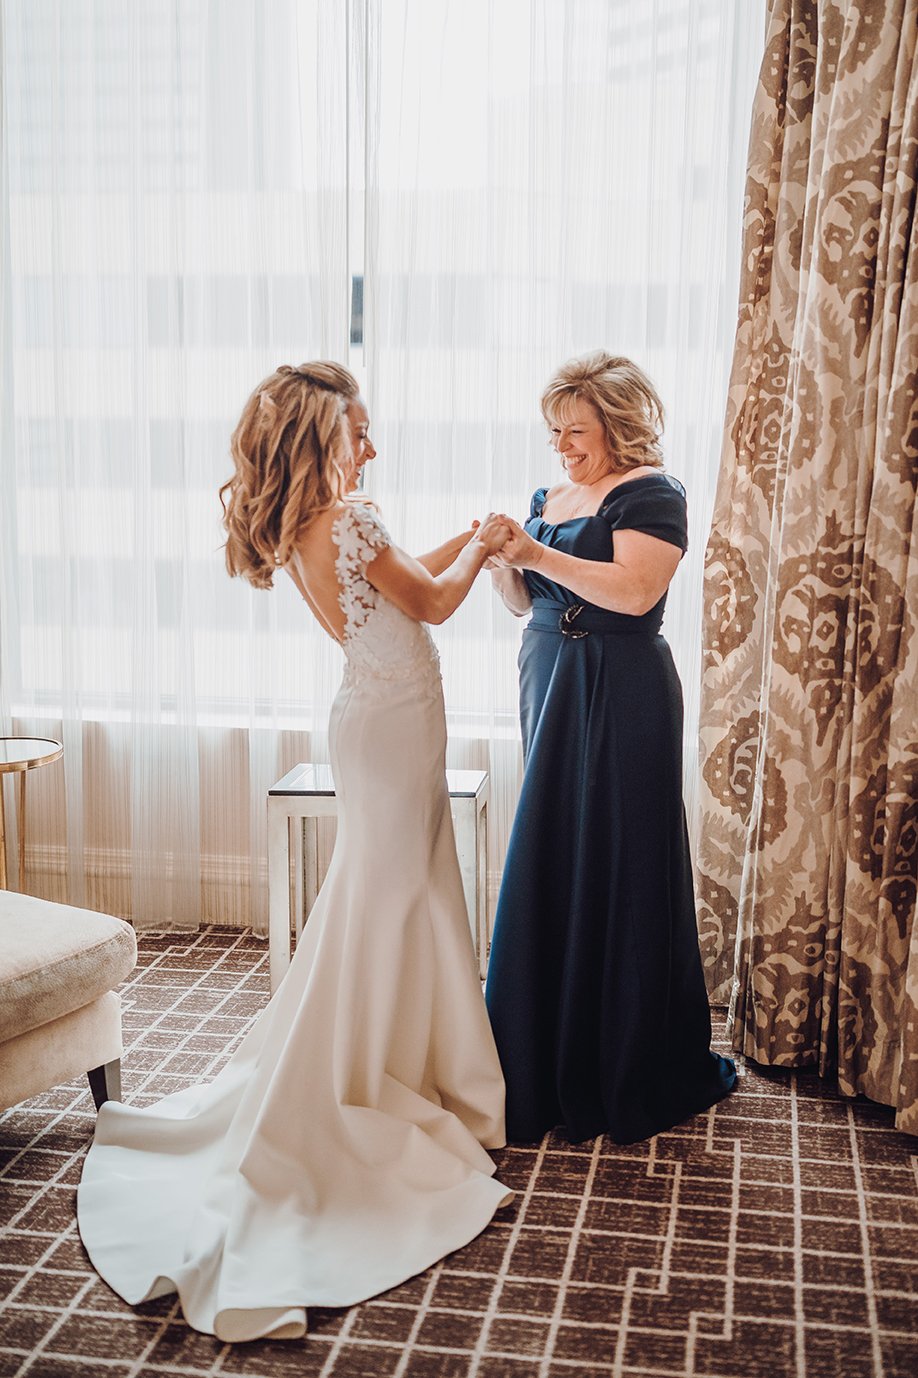 Houston Wedding, Mother of the Bride, Bride, Getting Ready